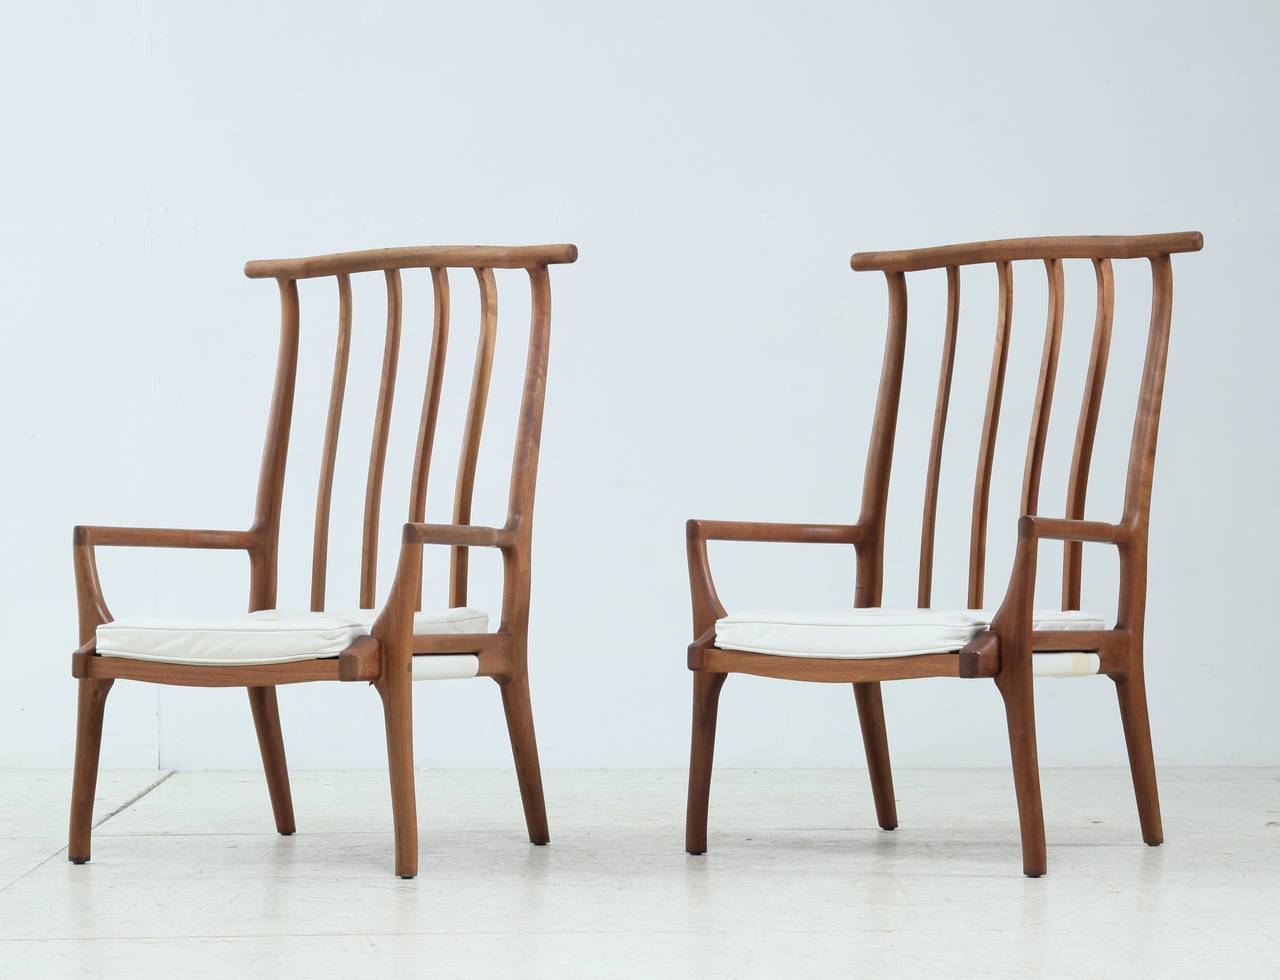 A pair of two custom, handmade Richard Harrison armchairs. These remarkable, lightweight and sculptural chairs are made of walnut with a white leather seat pad. The chairs have beautiful connections and are in a perfect condition.

We have two